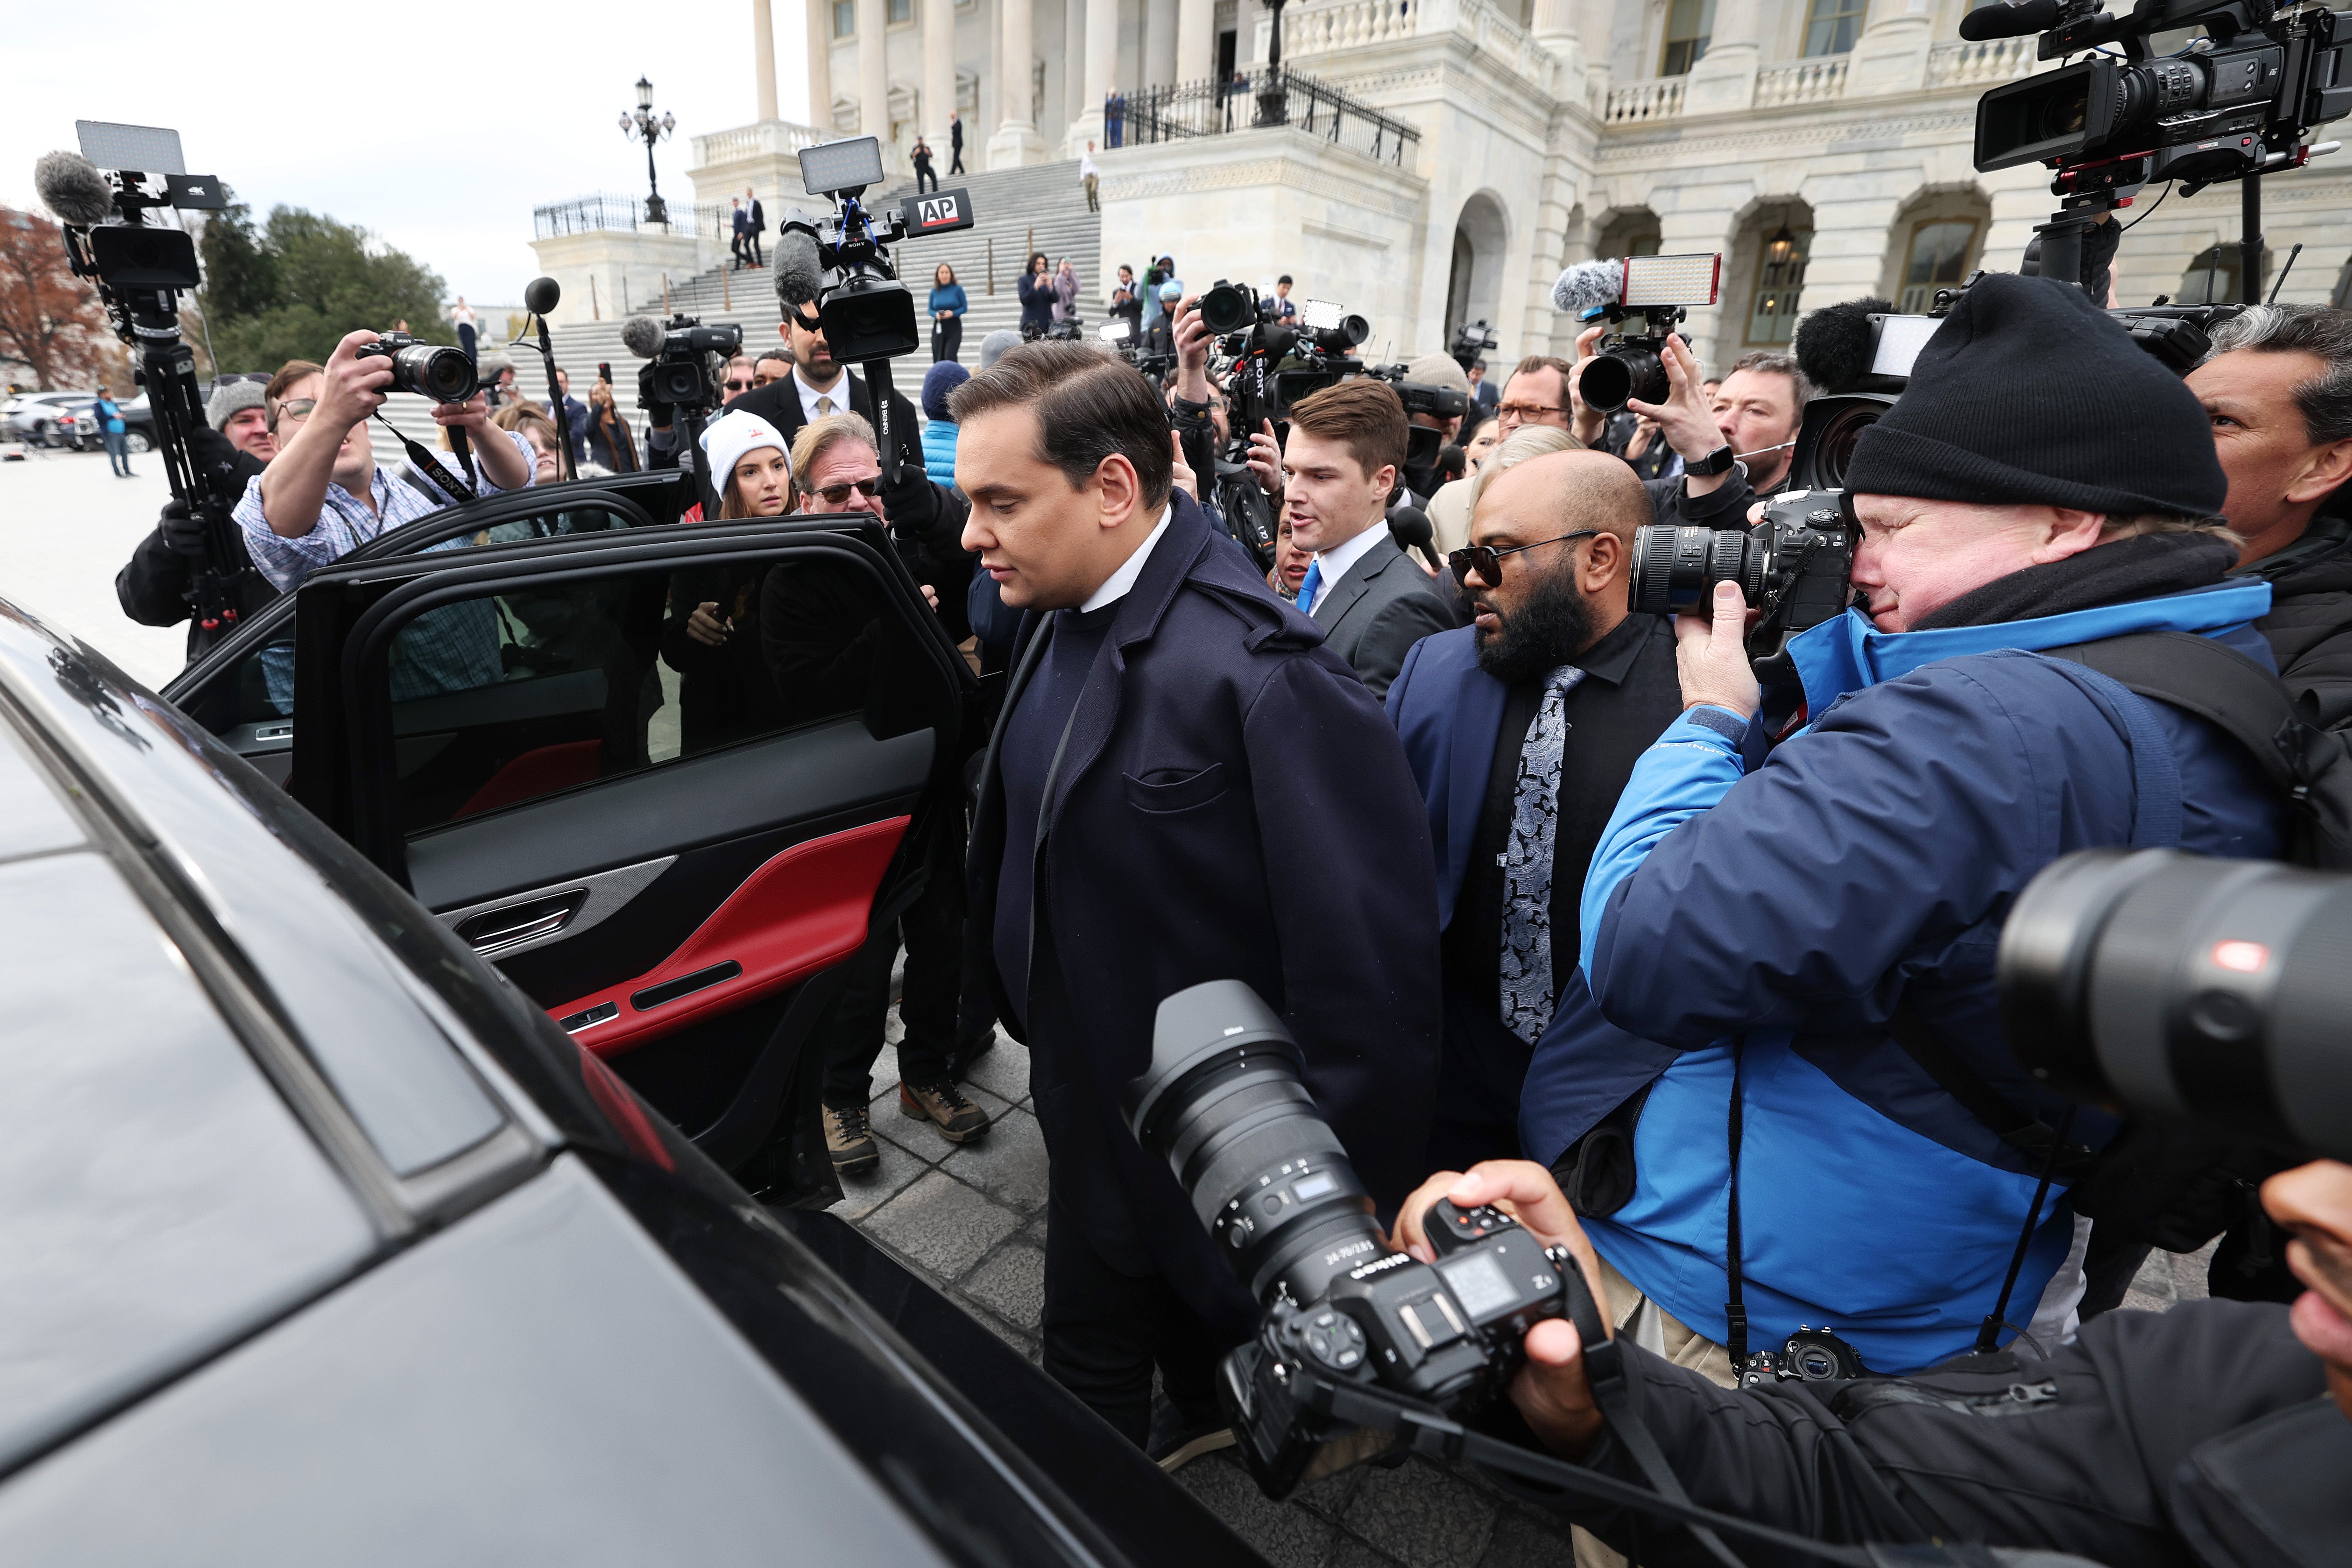 George Santos is surrounded by journalists as he leaves the US Capitol after his fellow members of Congress voted to expel him from the House of Representatives on 1 December